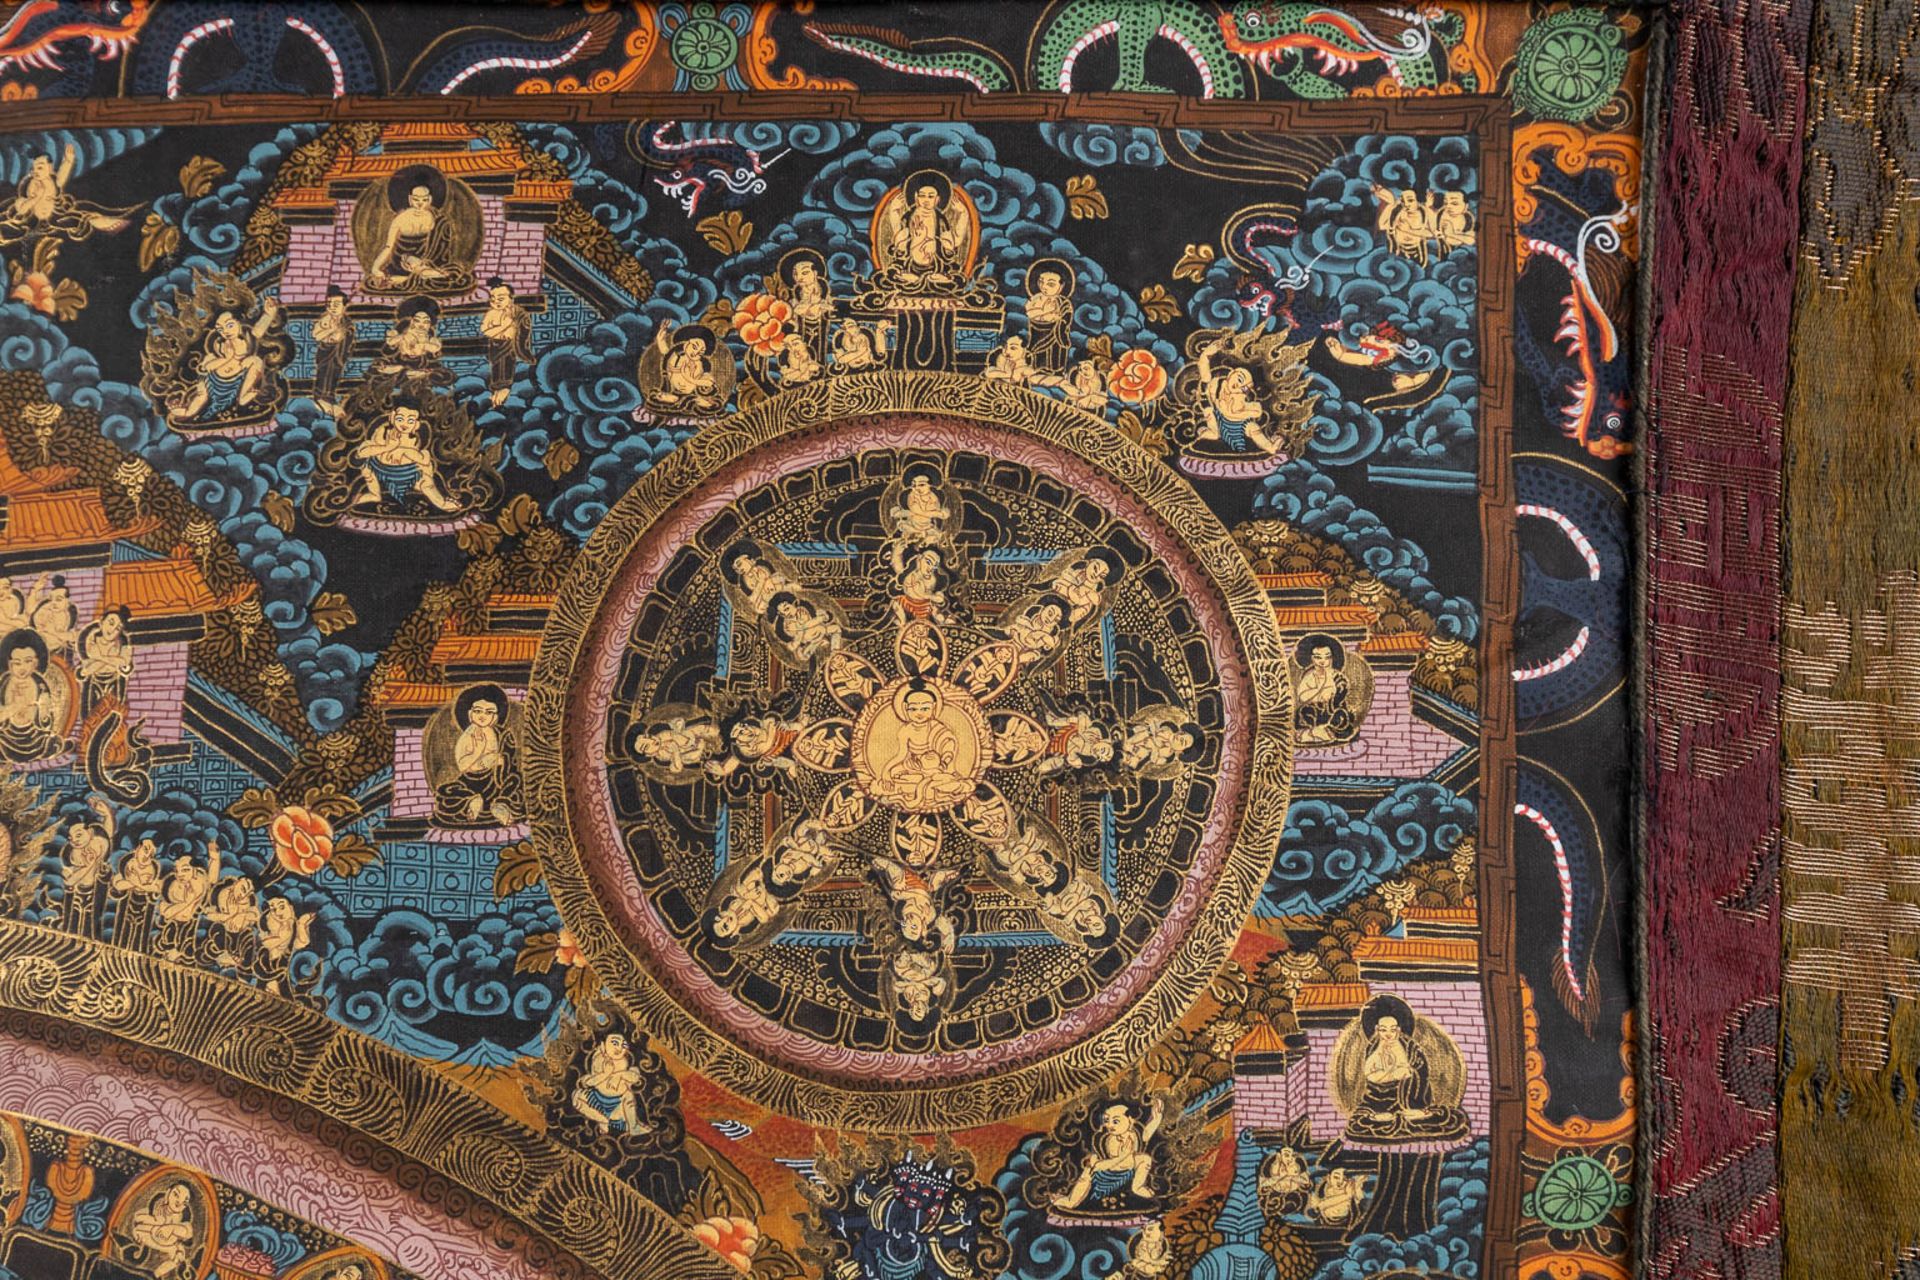 An Eastern Thangka, hand-painted decor on silk. (W:57 x H:74 cm) - Image 6 of 13